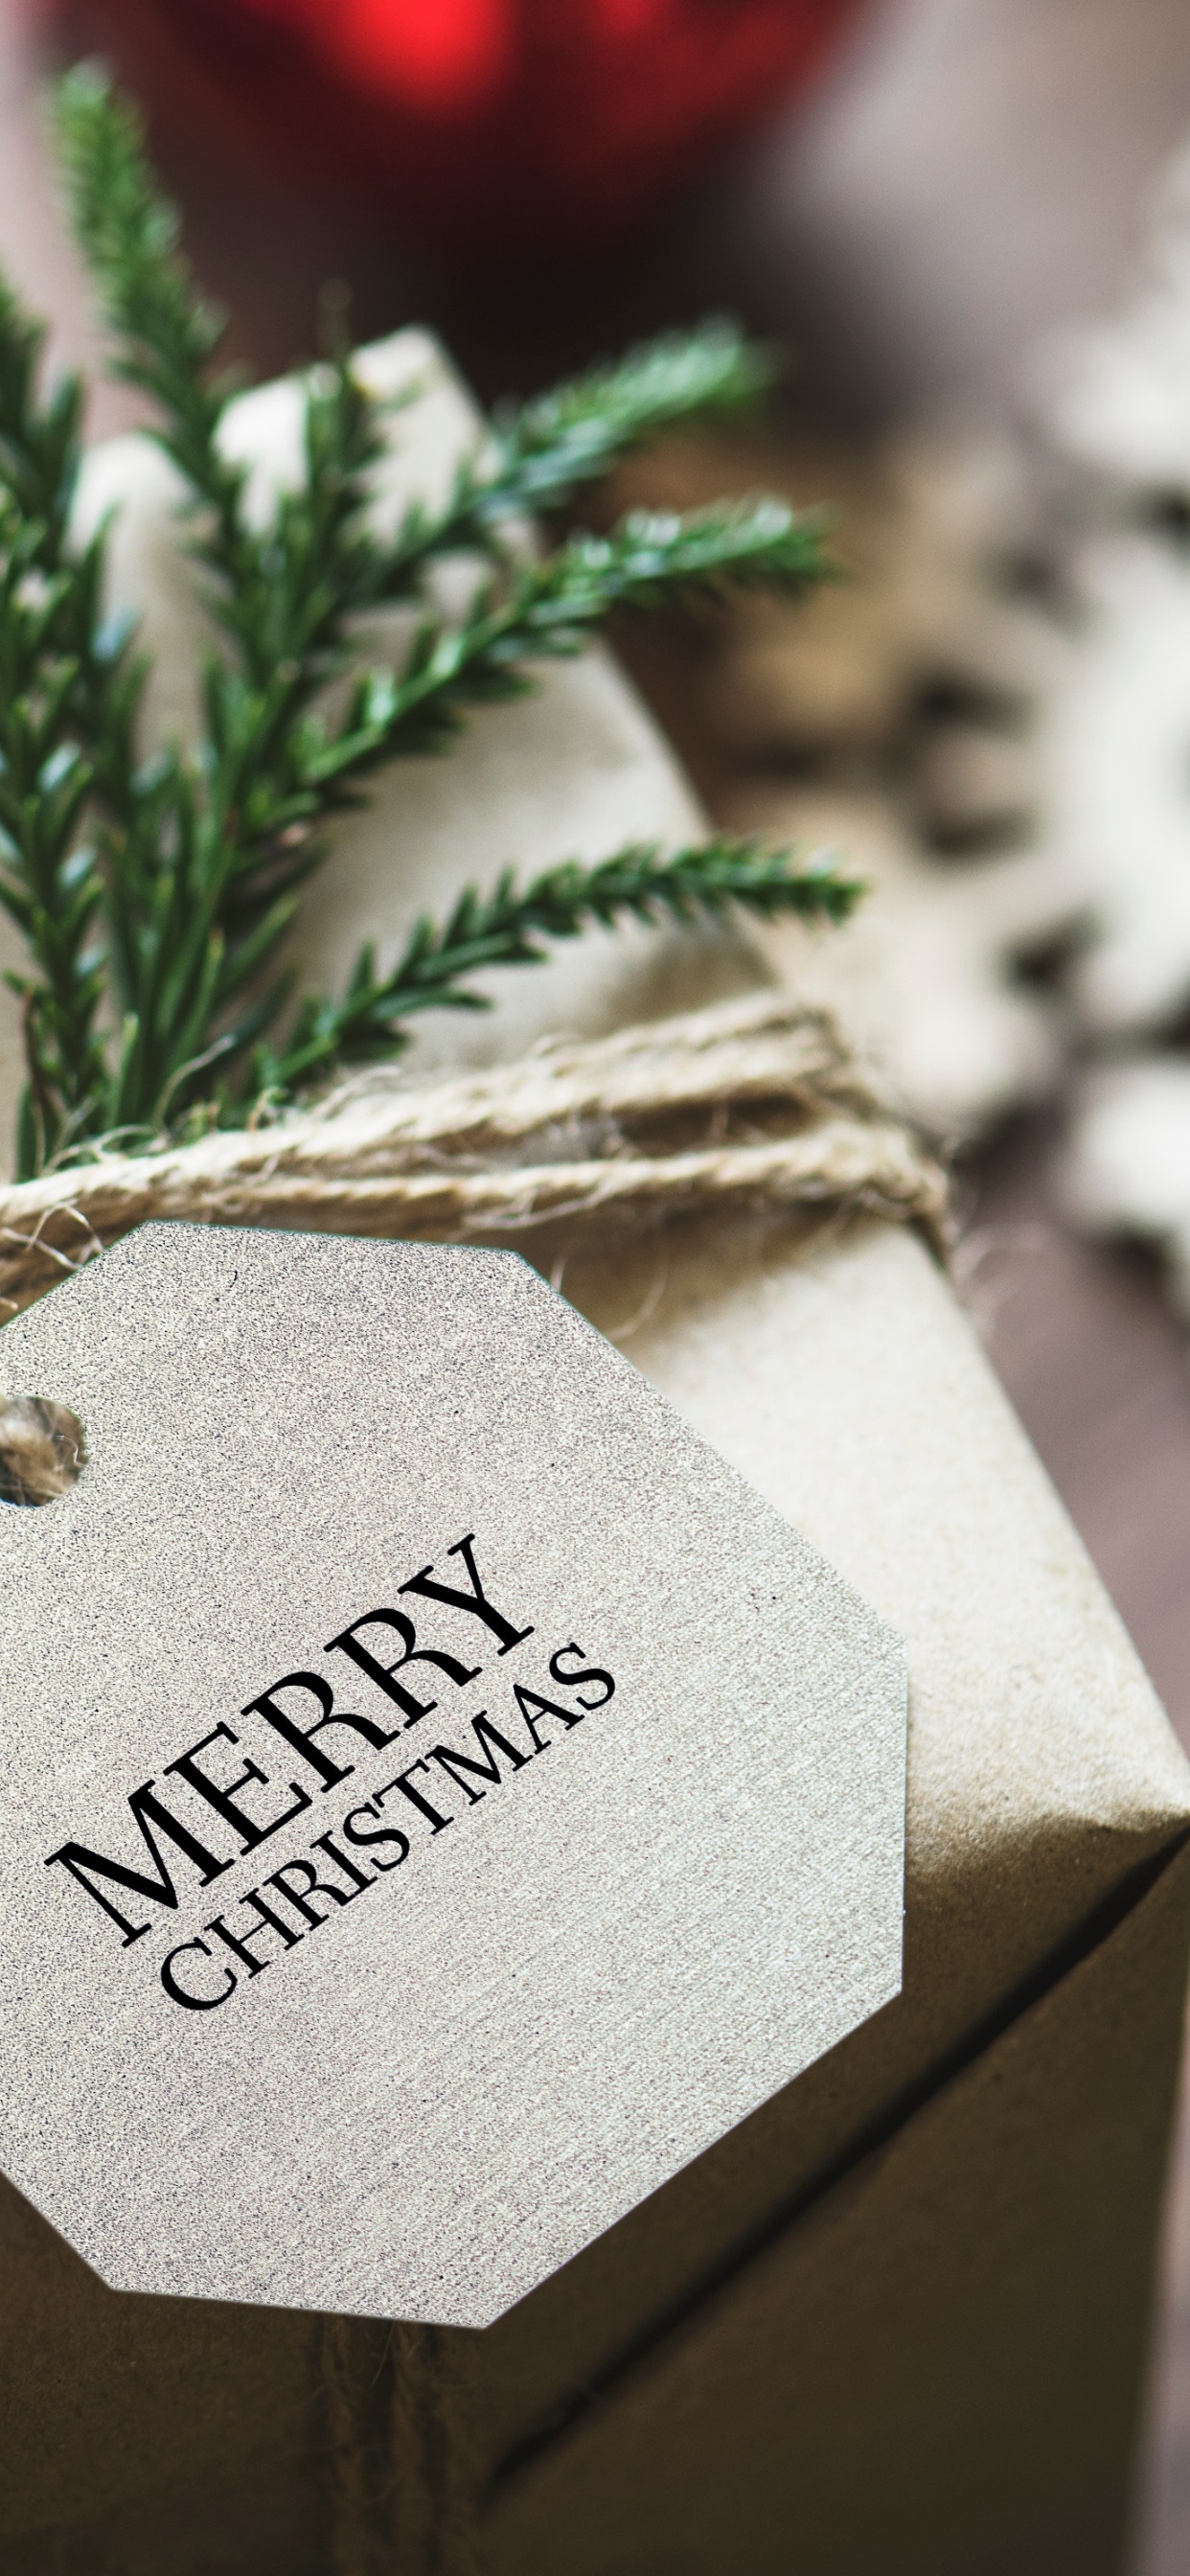 Christmas Day, Christmas Gift, Gift, Christmas Card, Gift Wrapping. Wallpaper in 1242x2688 Resolution